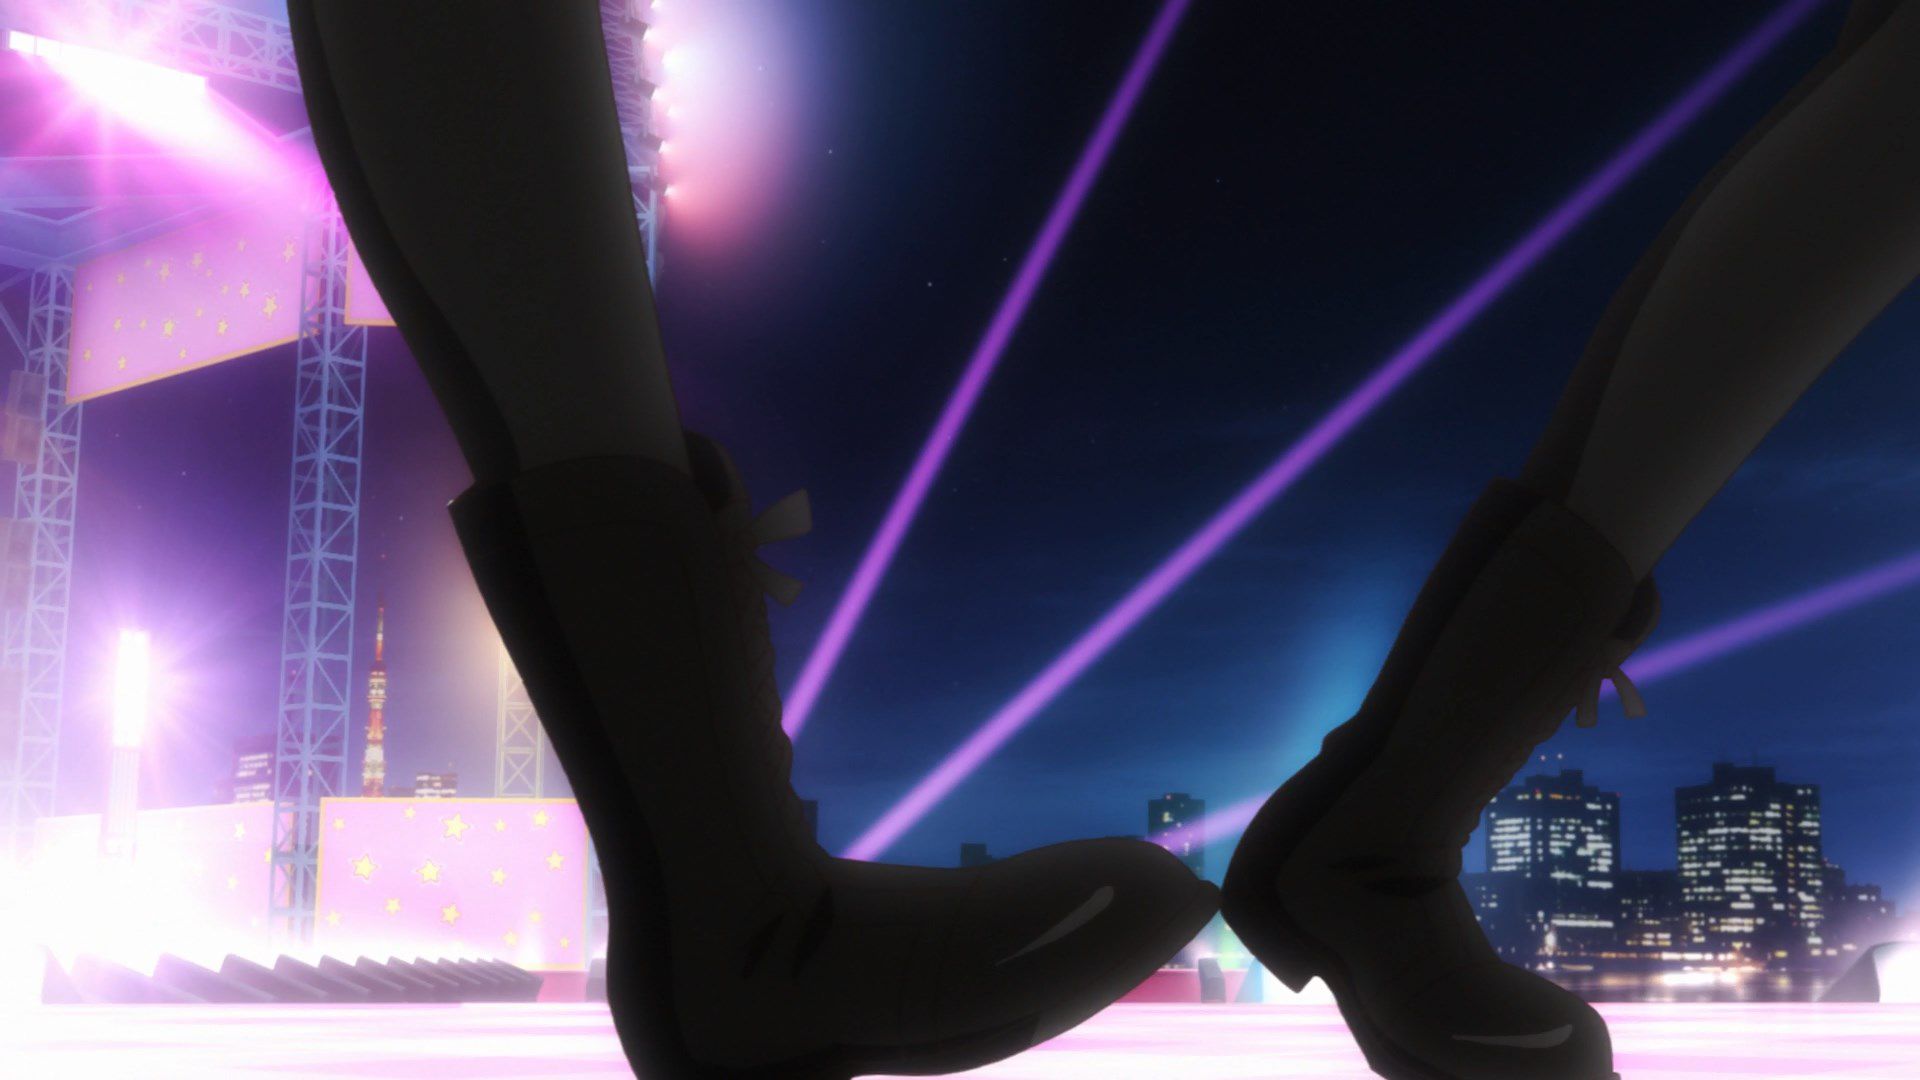 [God images] "love live! ' Μm ' PV's leg is too erotic everyone wakes up to a leg fetish of wwwww 26